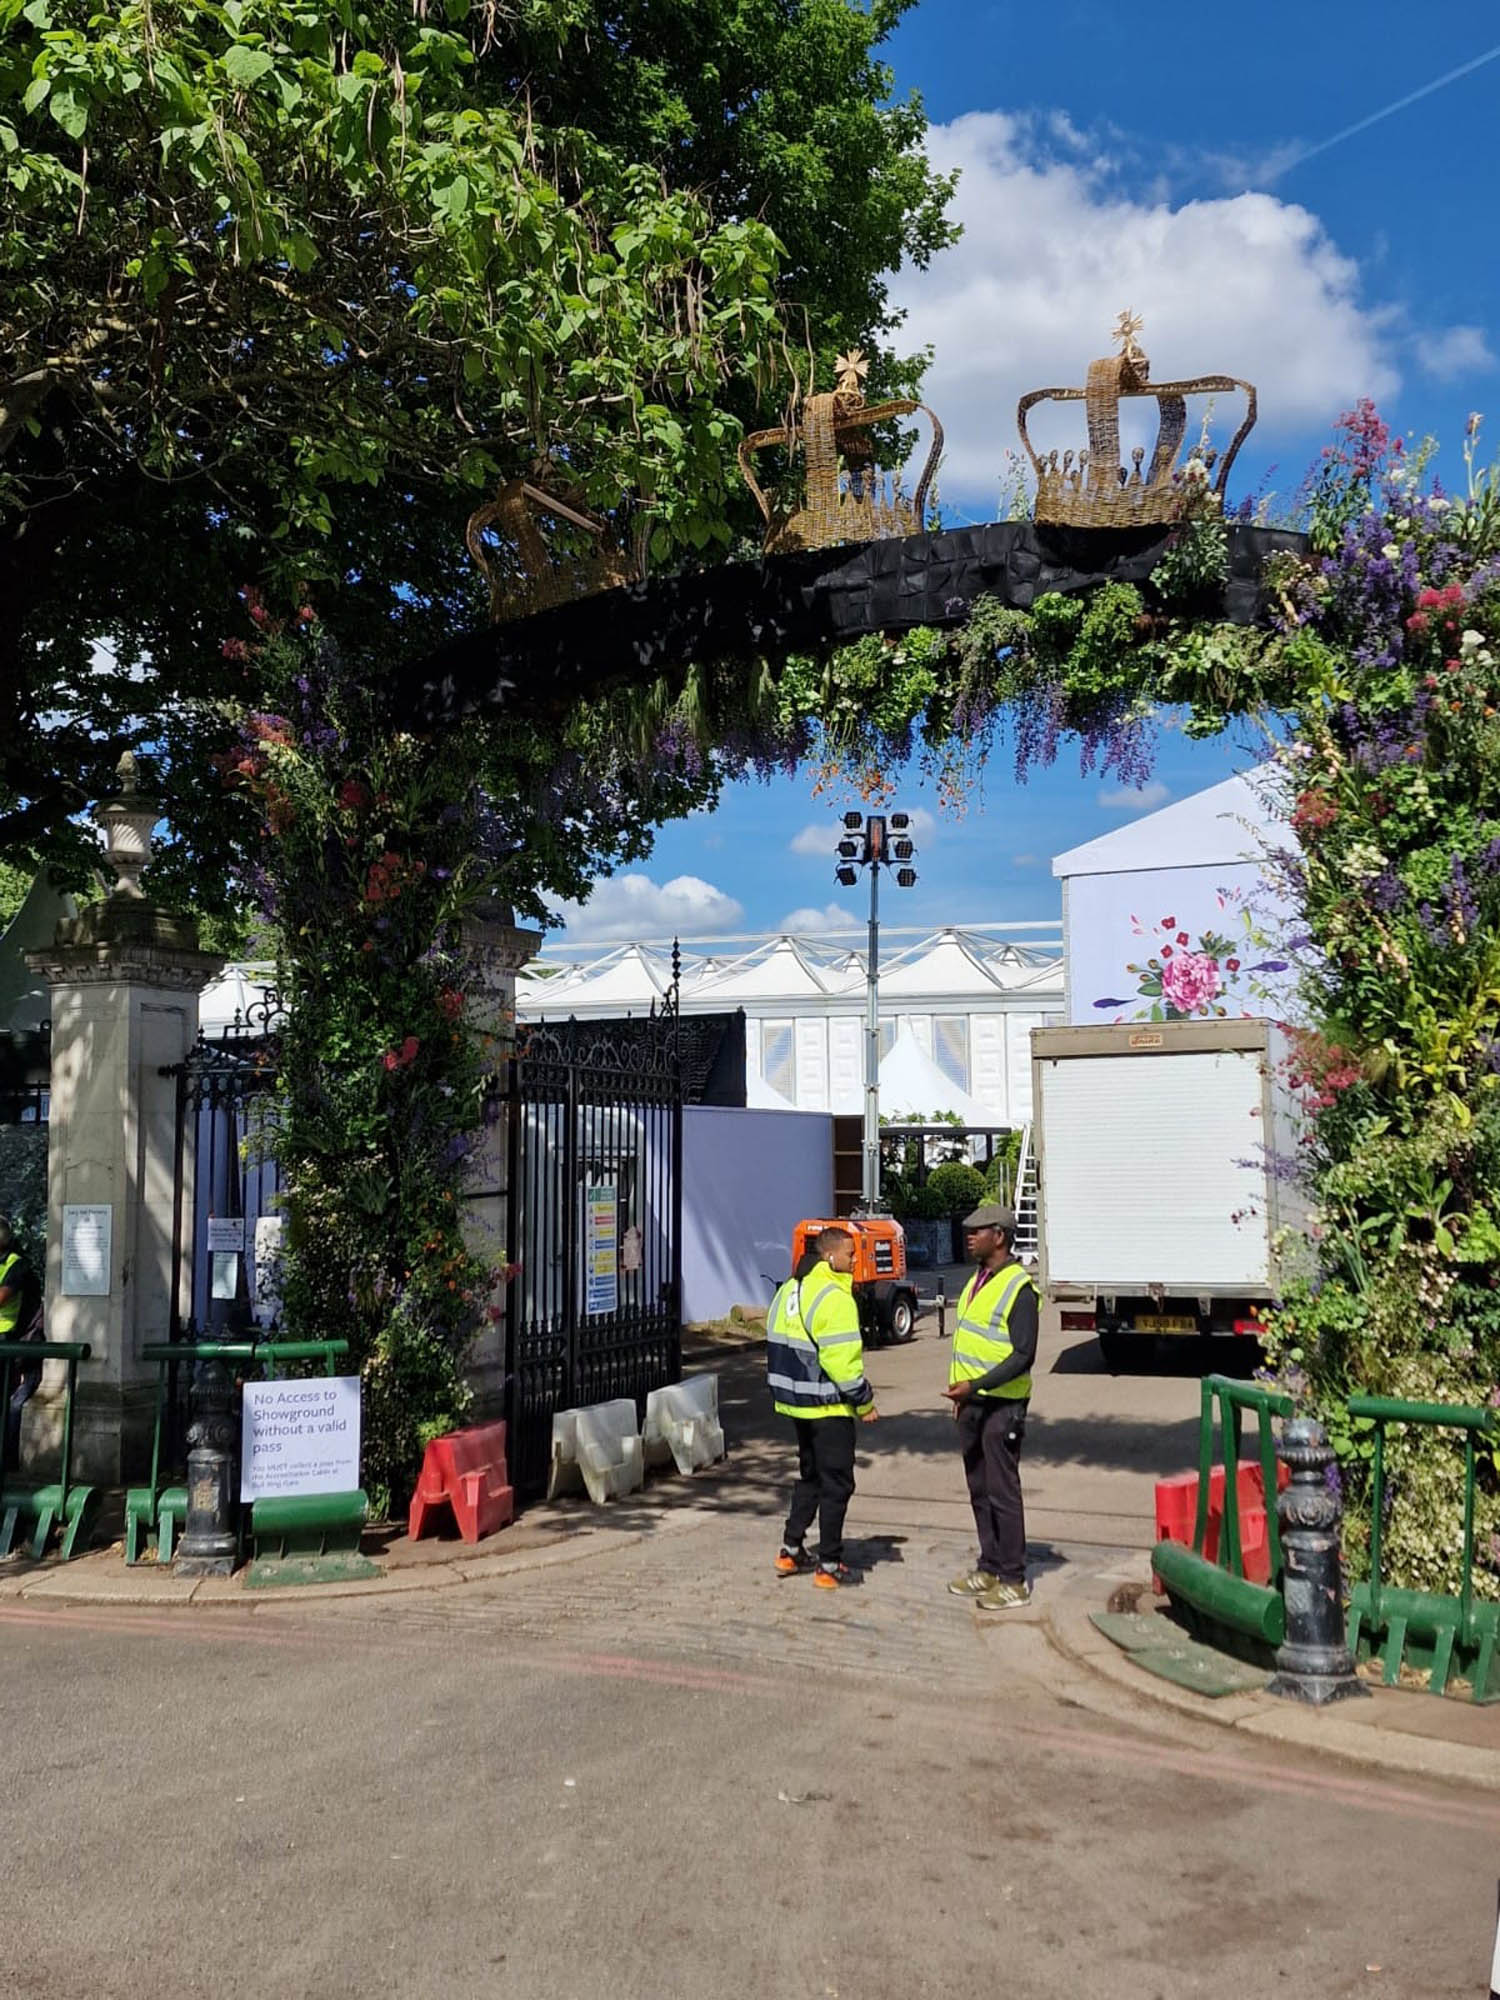 Queens gate at chelsea flower show 2022 is huge living floral arch with foliage and flowers and wicker crowns decorating the top as part of the jubilee celebrations in the gardens